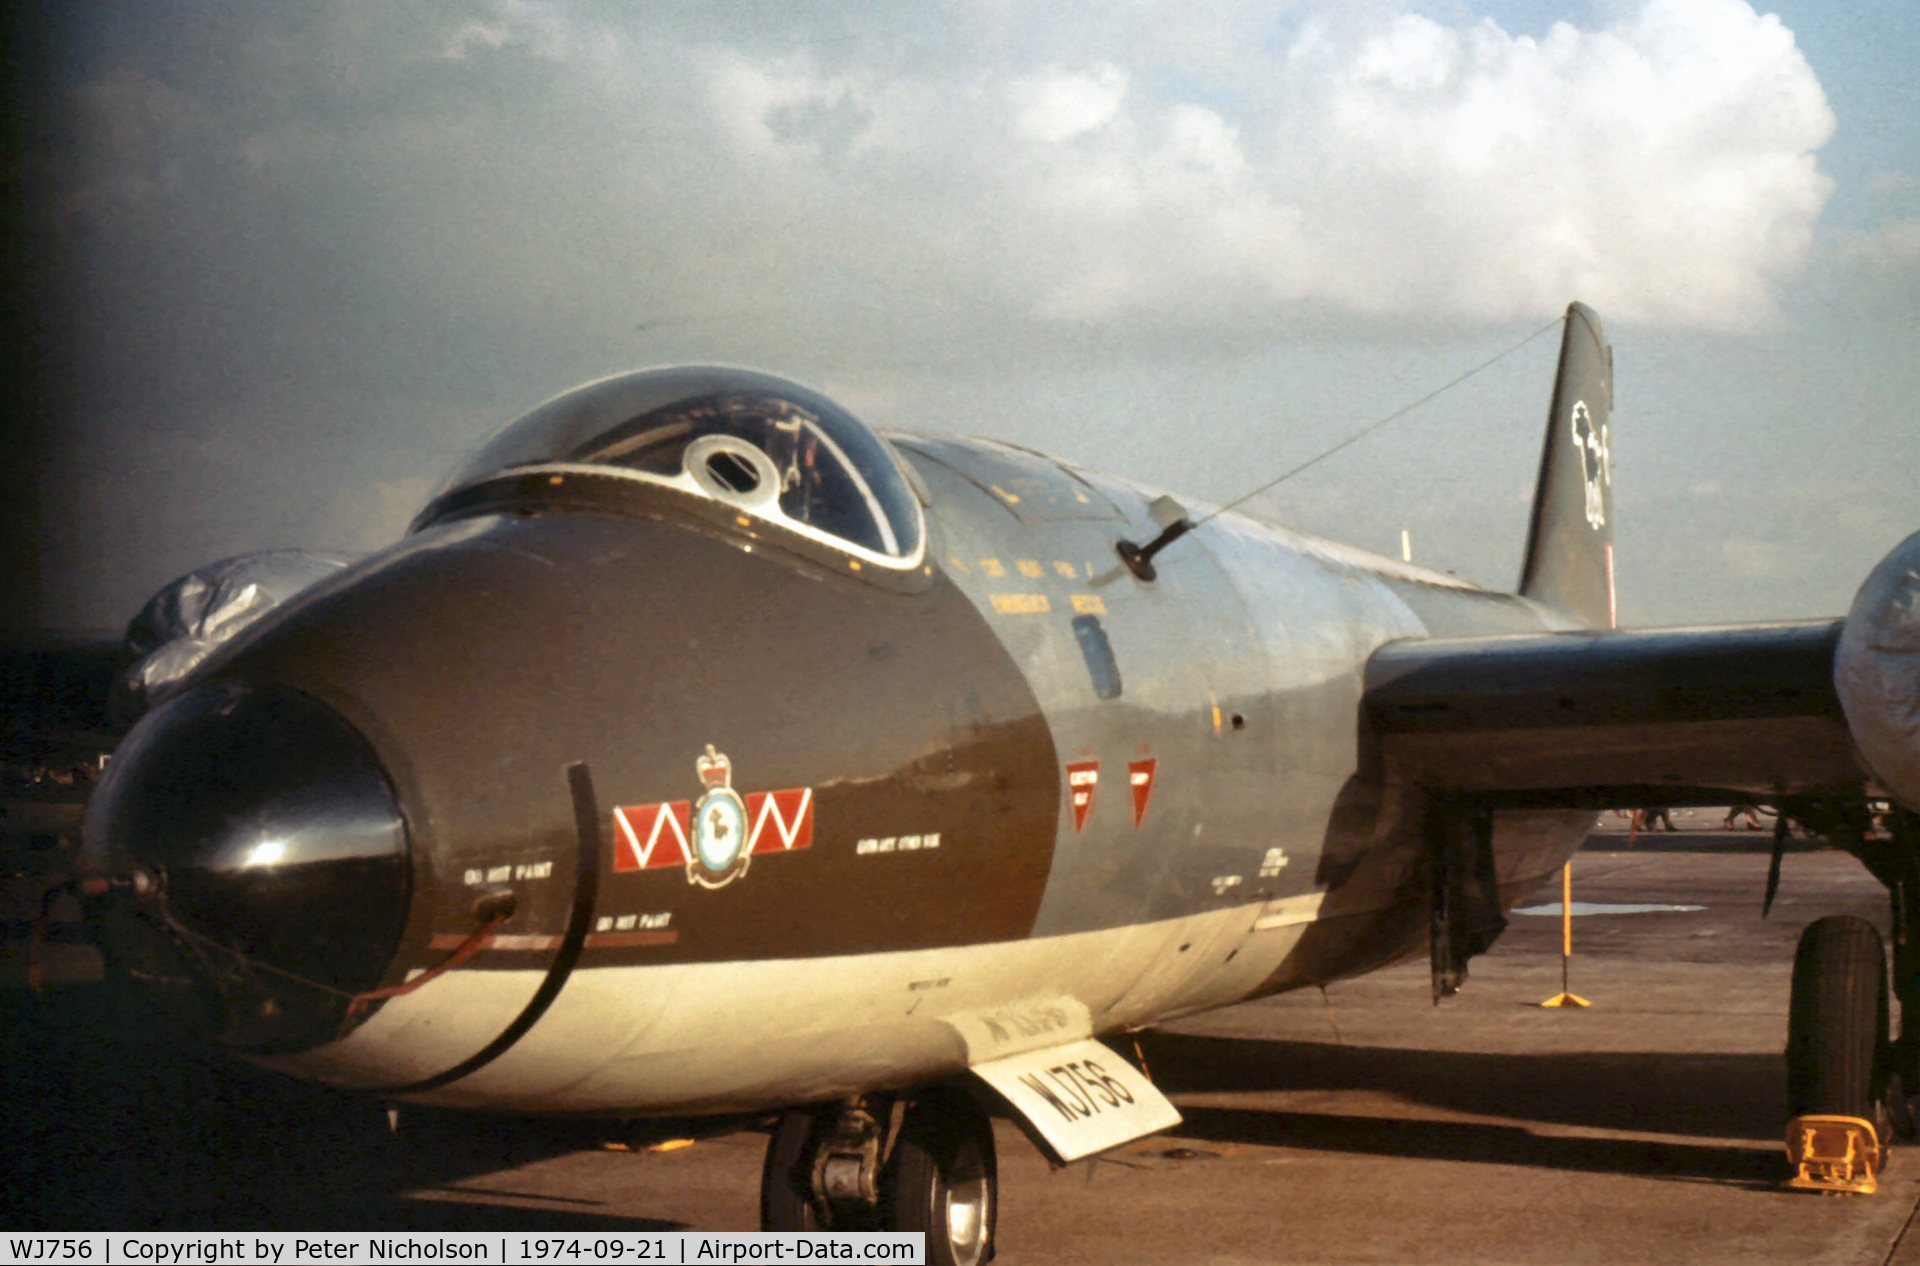 WJ756, 1954 English Electric Canberra E.15 C/N Not found WJ756, Another view of 98 Squadron's Canberra E.15 at the 1974 RAF Finningley Airshow.